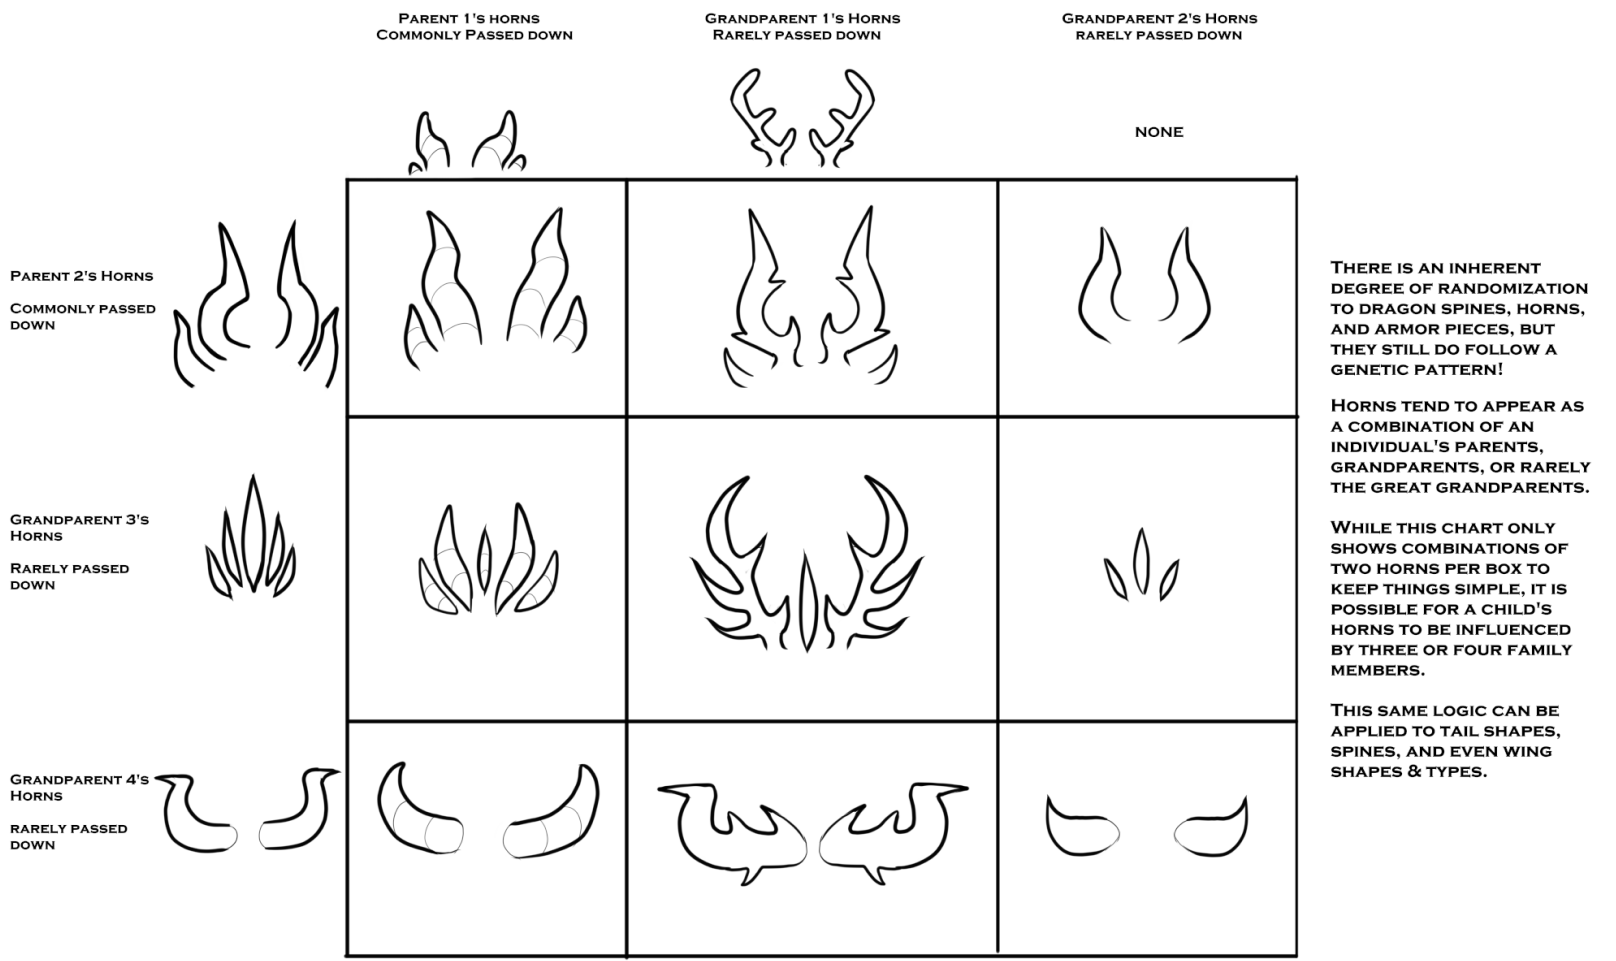 There is an inherent degree of randomization to dragon spines, horns, and armor pieces, but they still do follow a genetic pattern! Horns tend to appear as a combination of an individual's parents, grandparents, or rarely the great grandparents. While this chart only shows combinations of two horns per box to keep things simple, it is possible for a child's horns to be influenced by three or four family members. This same logic can be applied to tail shapes, spines, and even wing shapes & types.